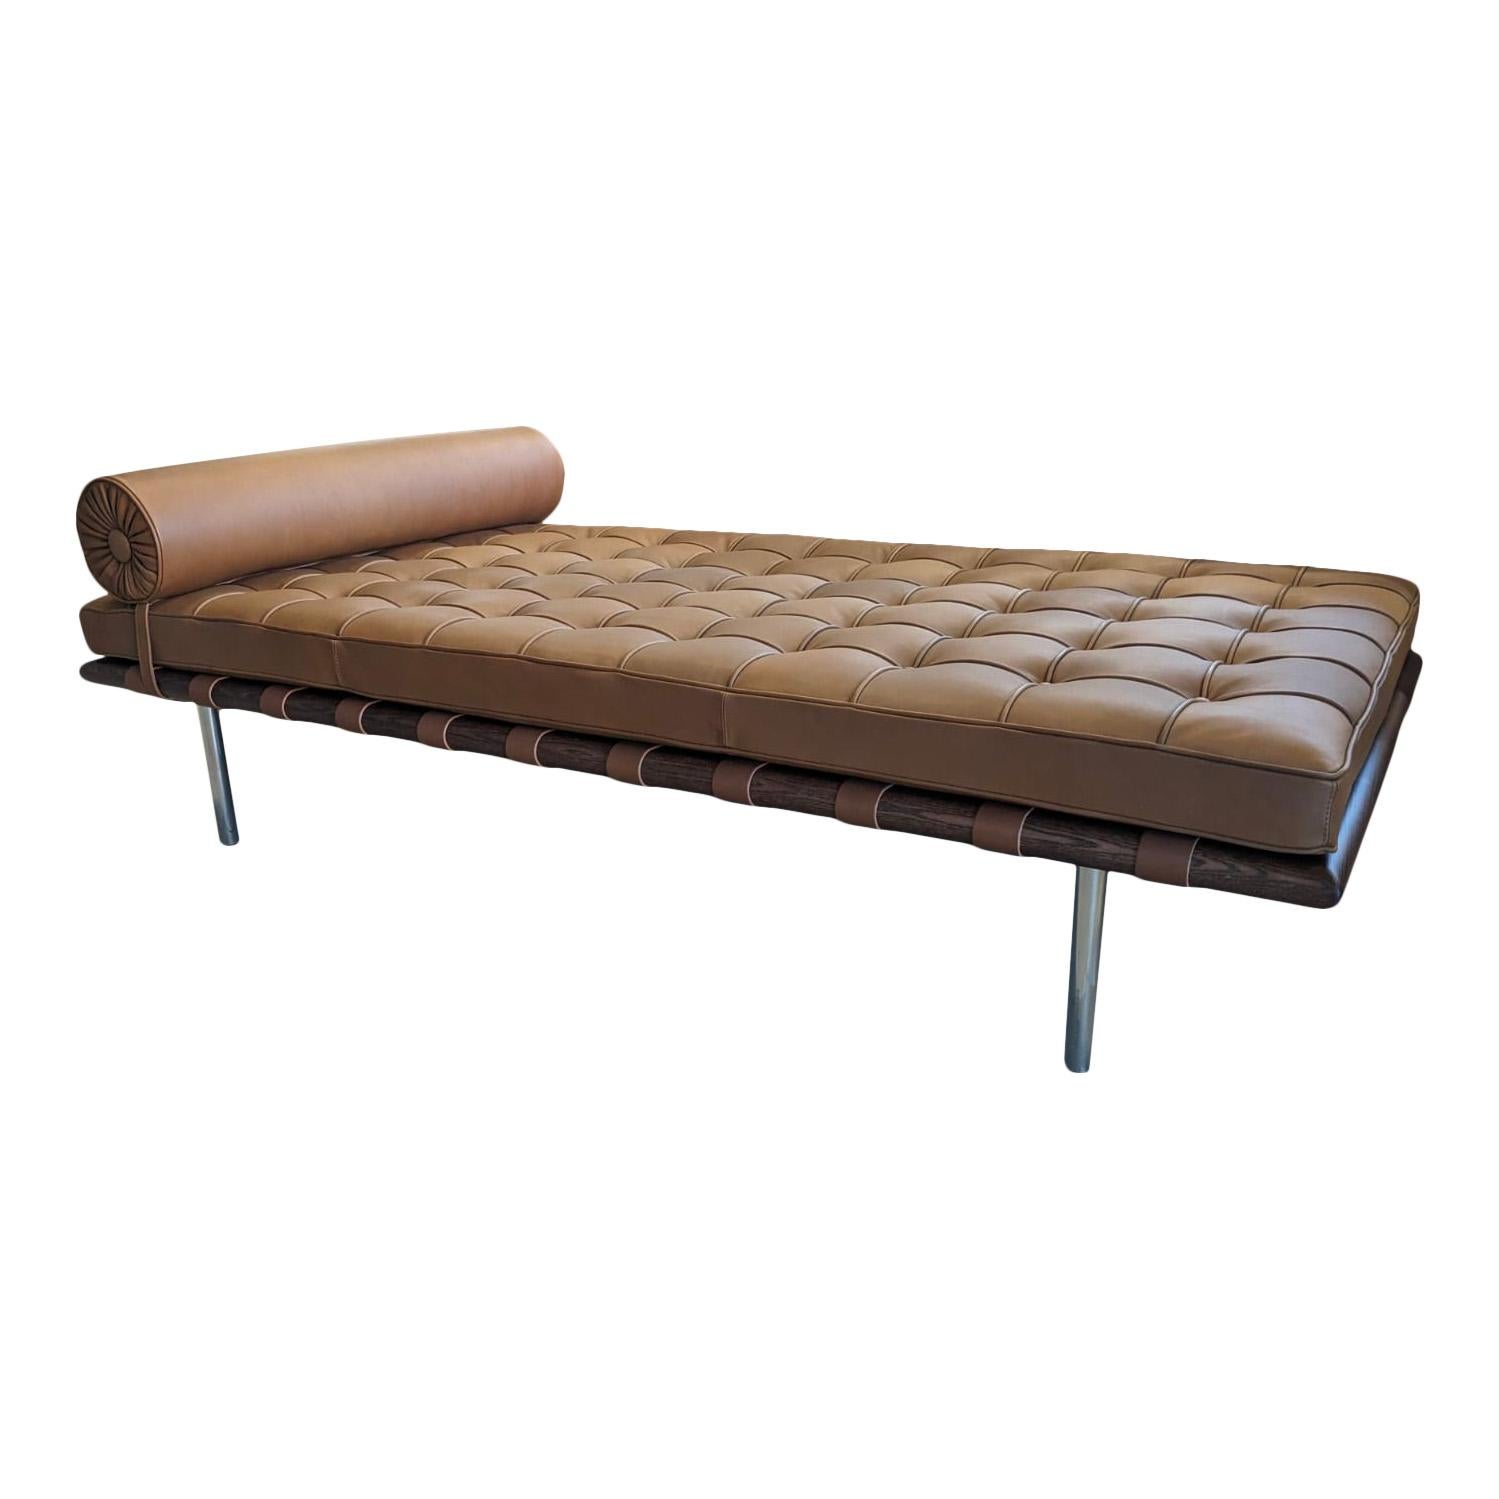 Italian Ludwig Mies Van Der Rohe Bauhaus Coffee Leather Barcelona Daybed for Knoll, 1970 For Sale